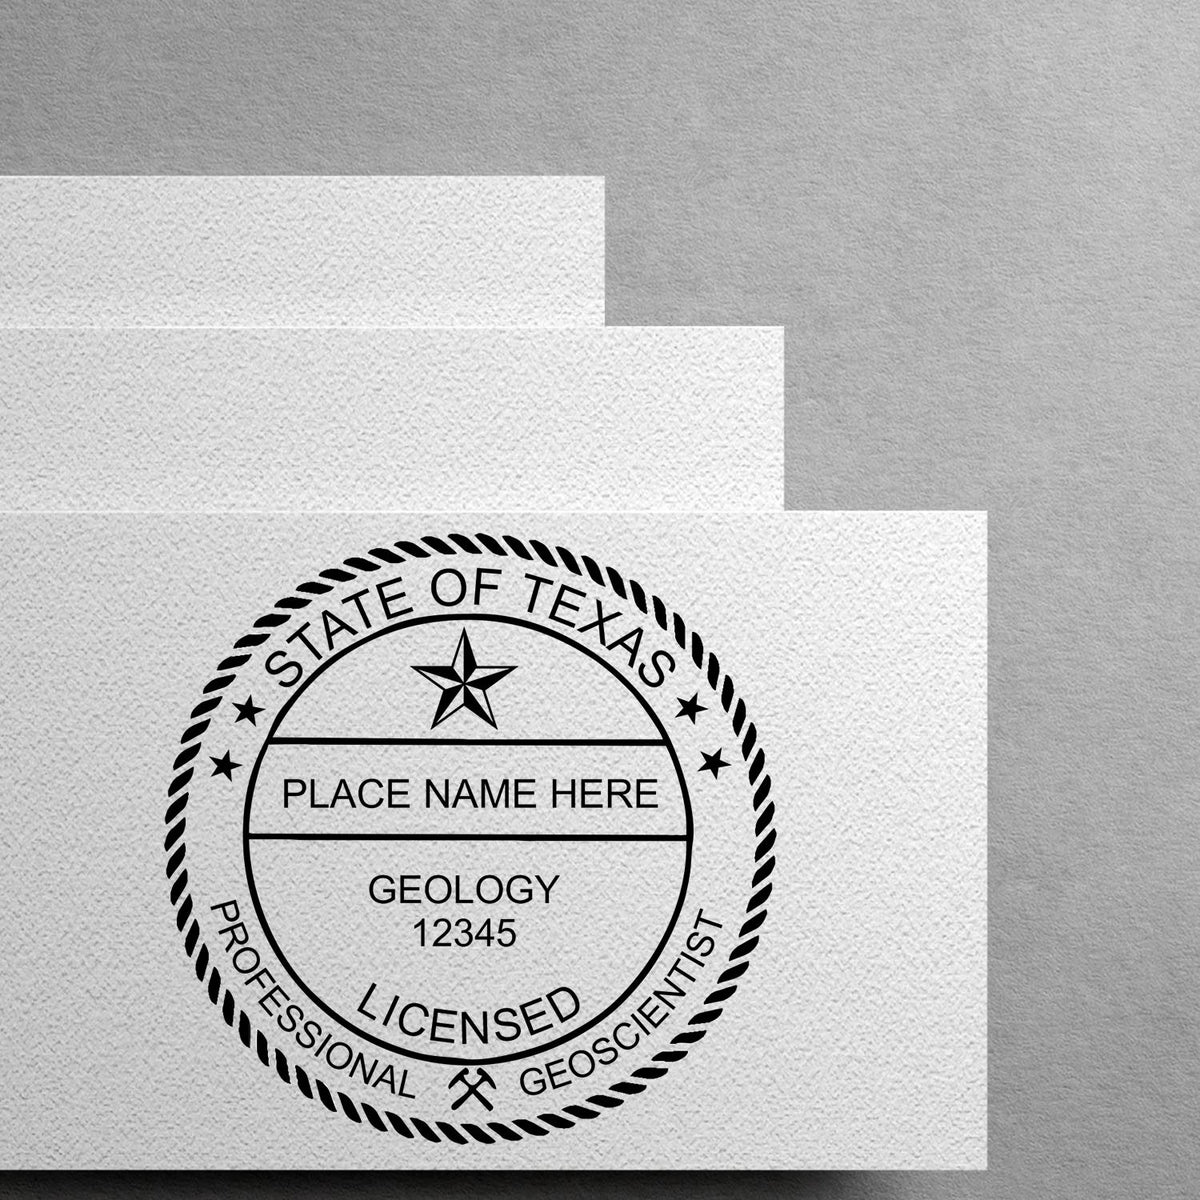 The Texas Professional Geologist Seal Stamp stamp impression comes to life with a crisp, detailed image stamped on paper - showcasing true professional quality.